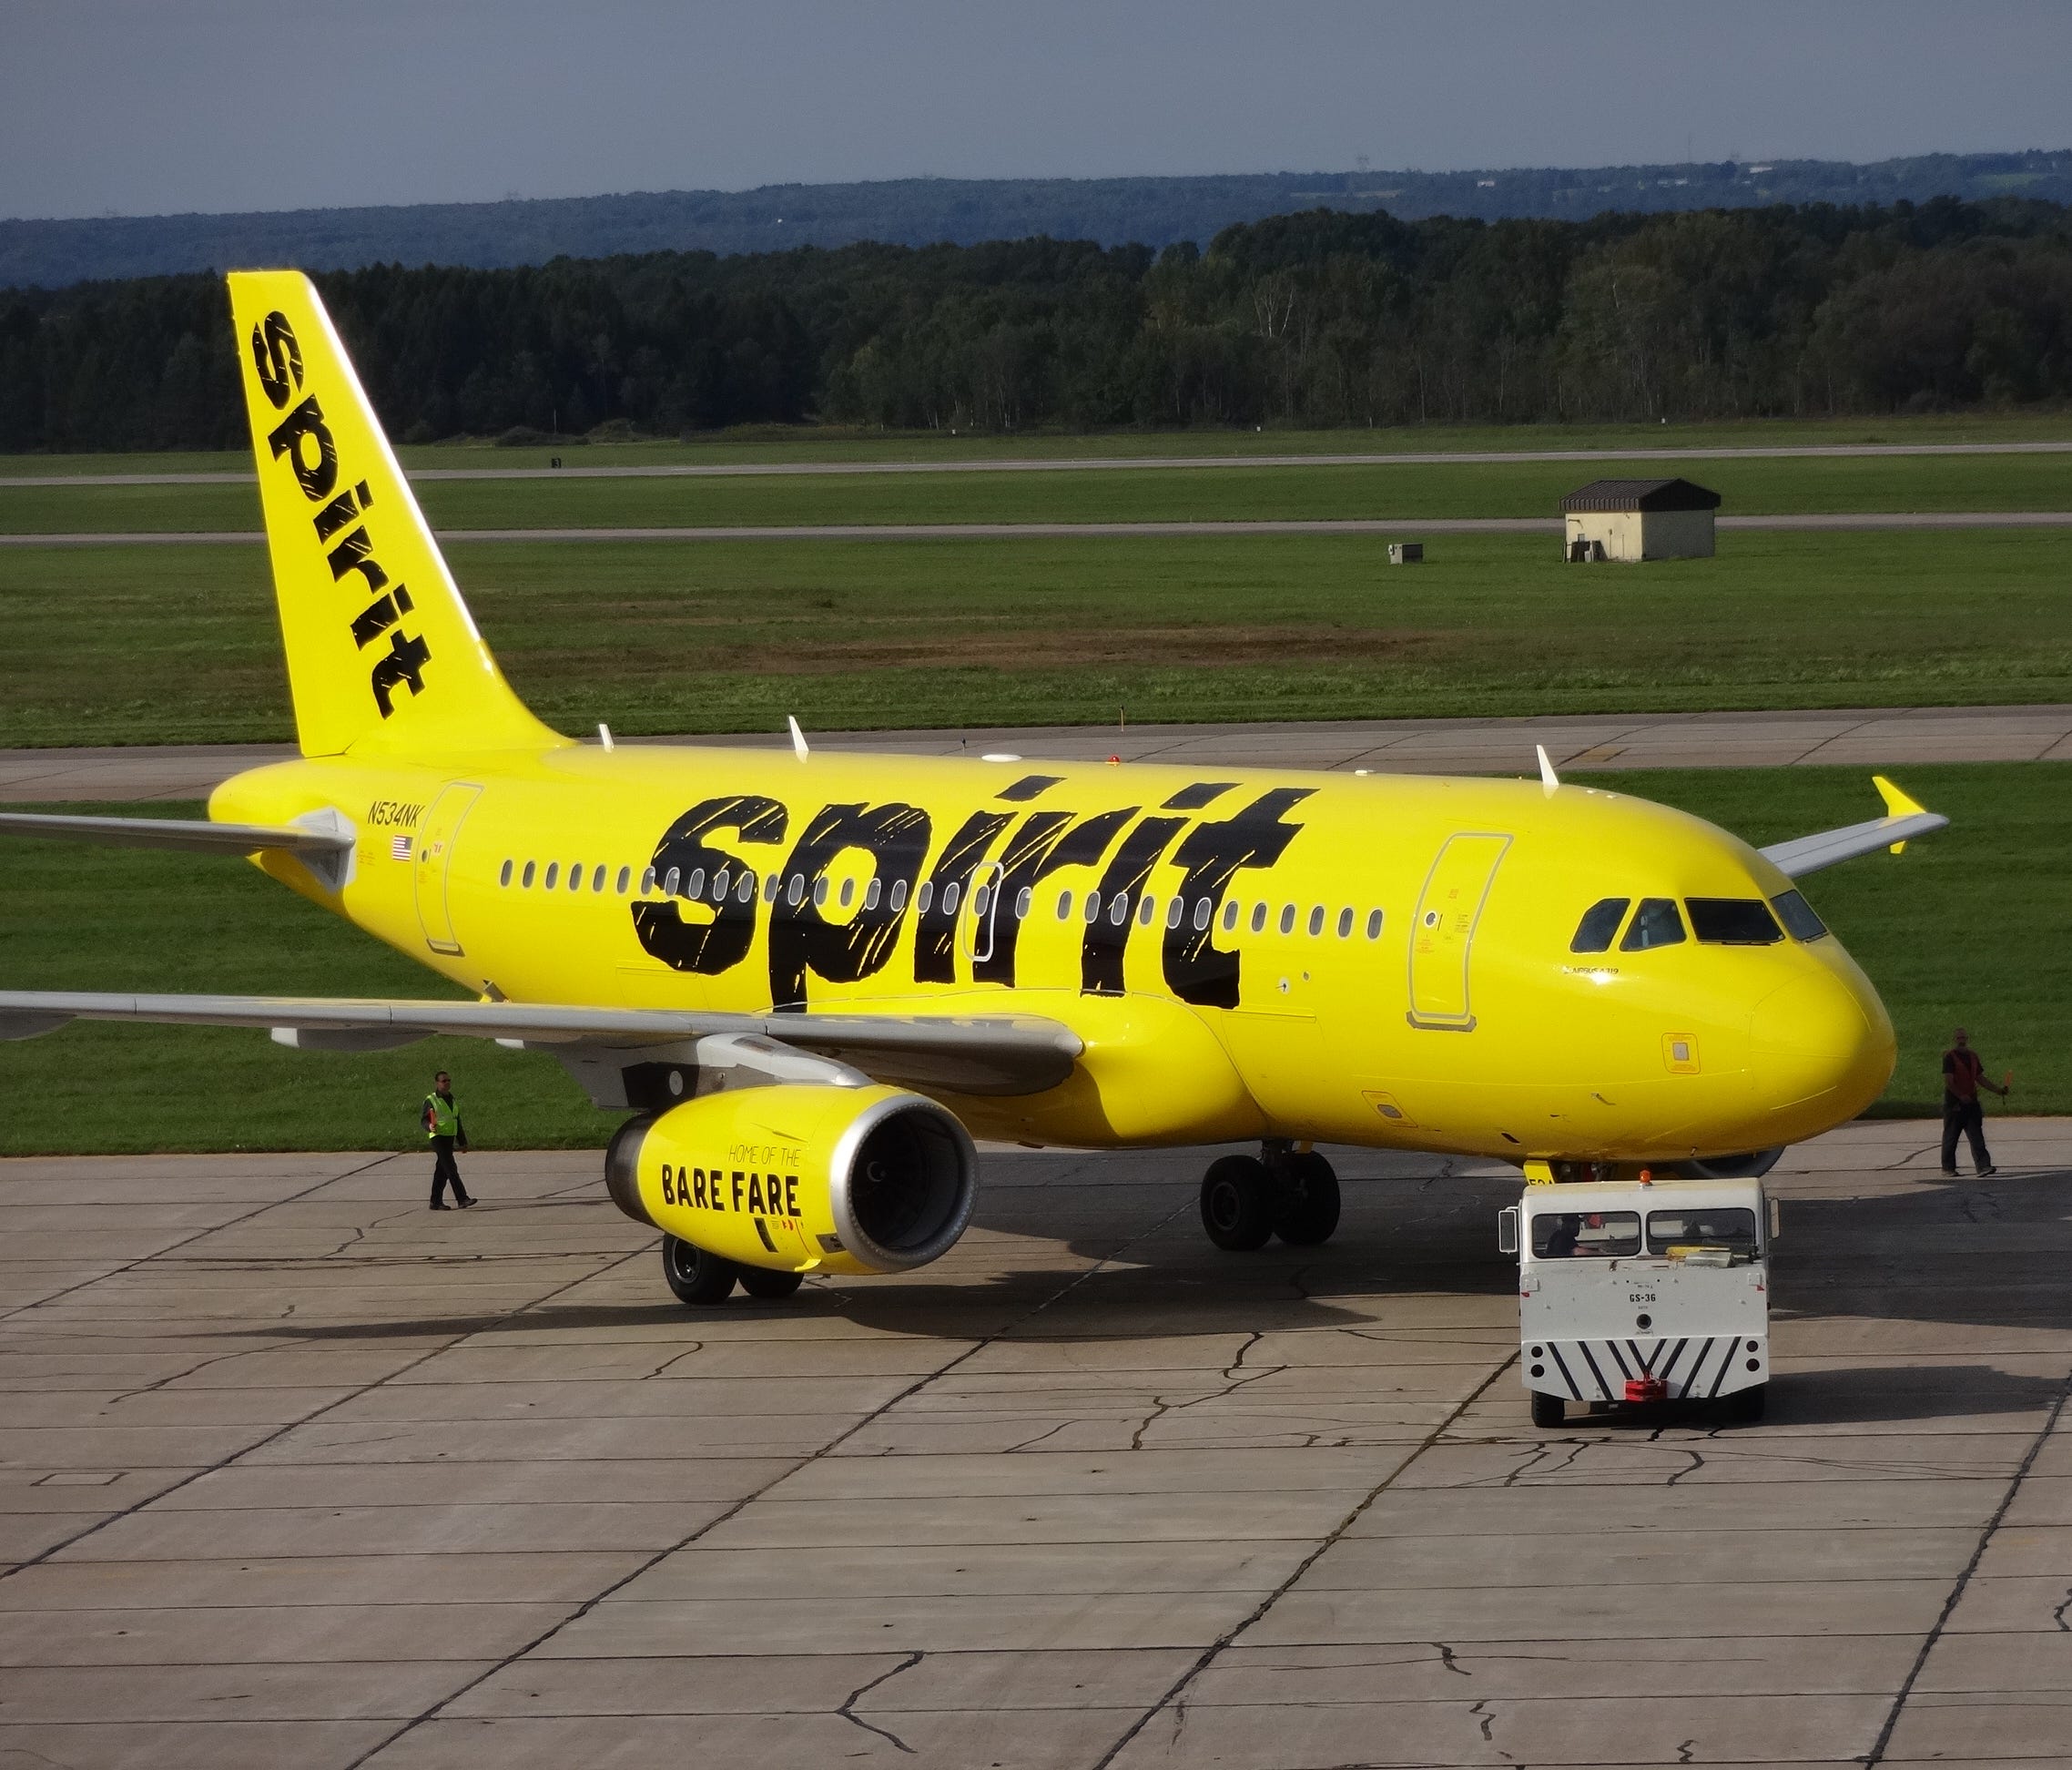 Spirit's first aircraft to get the airline's new paint scheme is rolled outside for photographs  at the Premier Aviation Overhaul Center in Rome, N.Y., on Sept. 15, 2014.